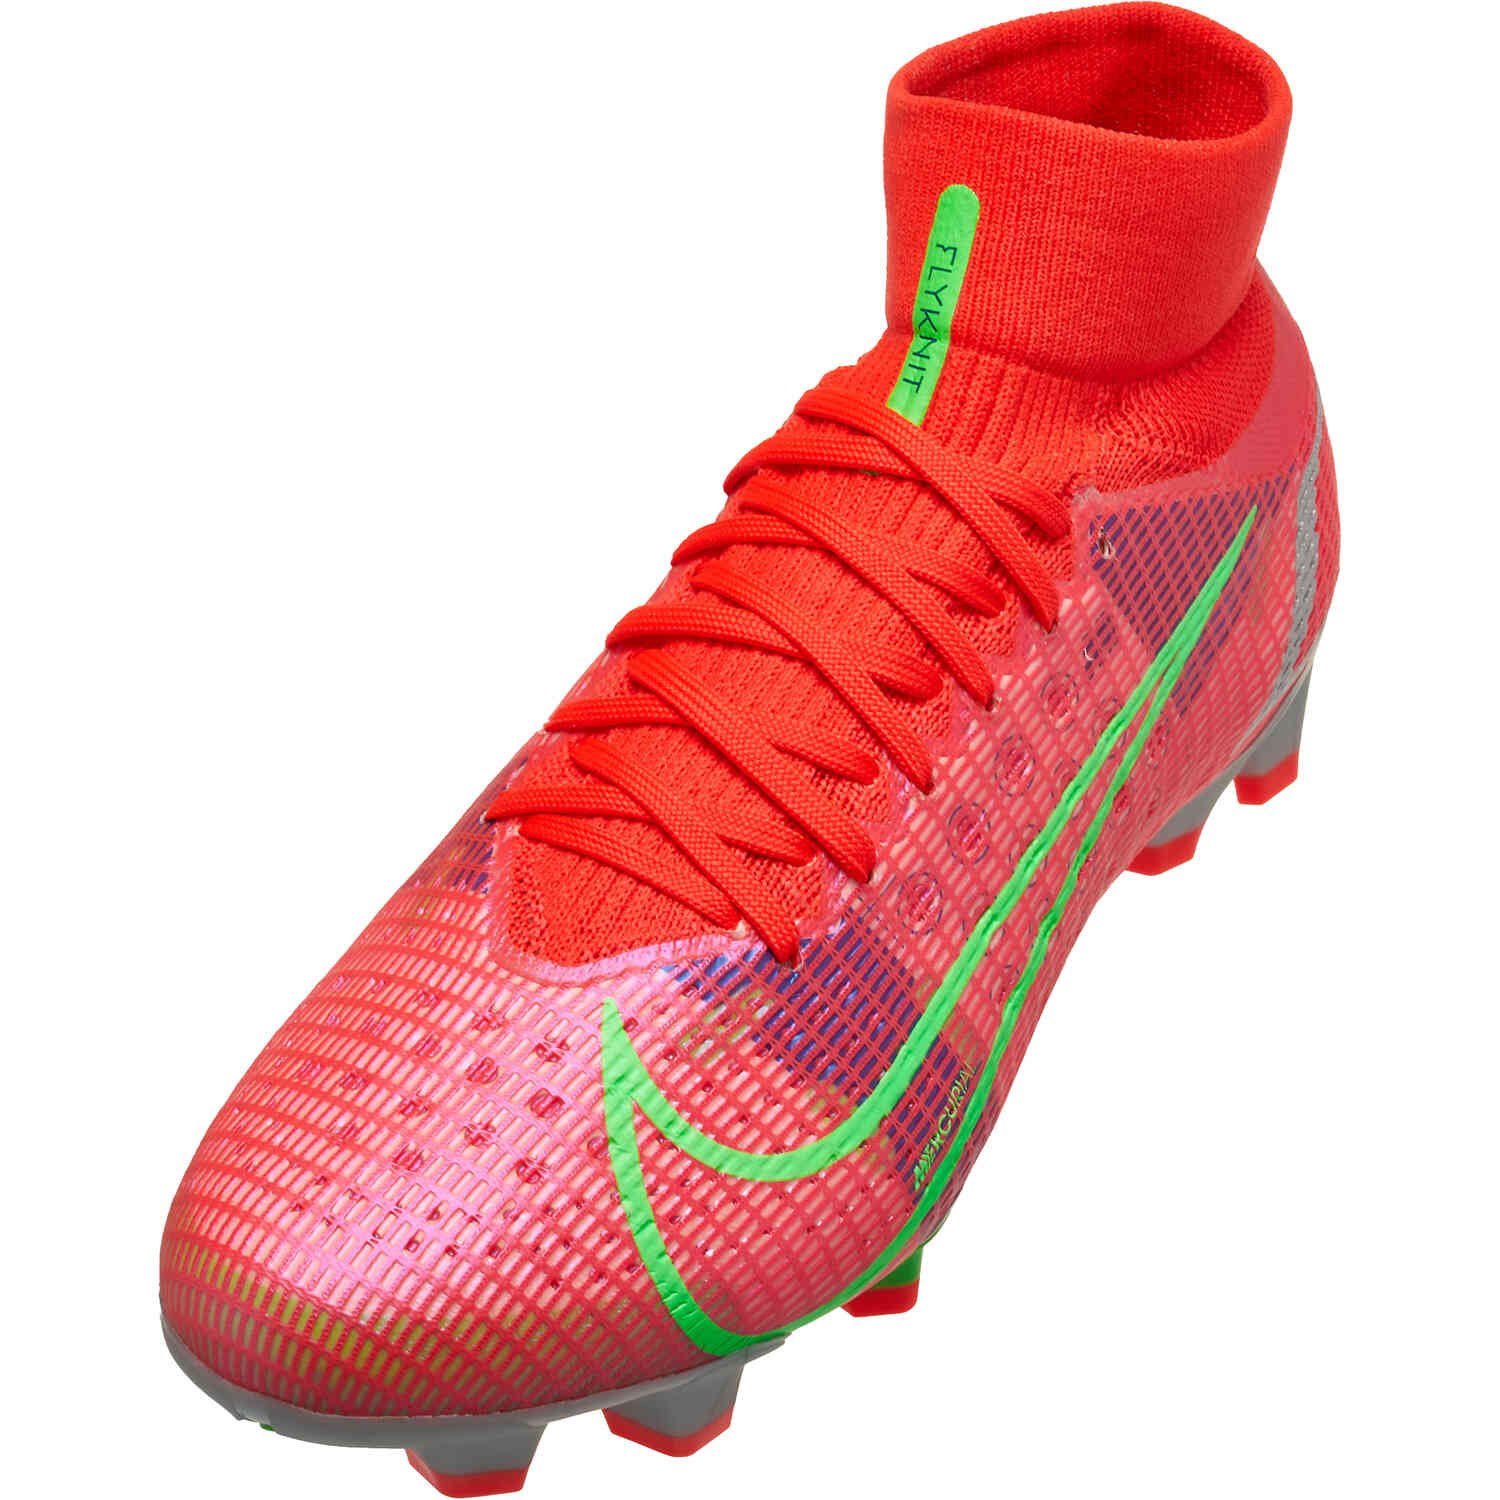 mercurial superfly pro